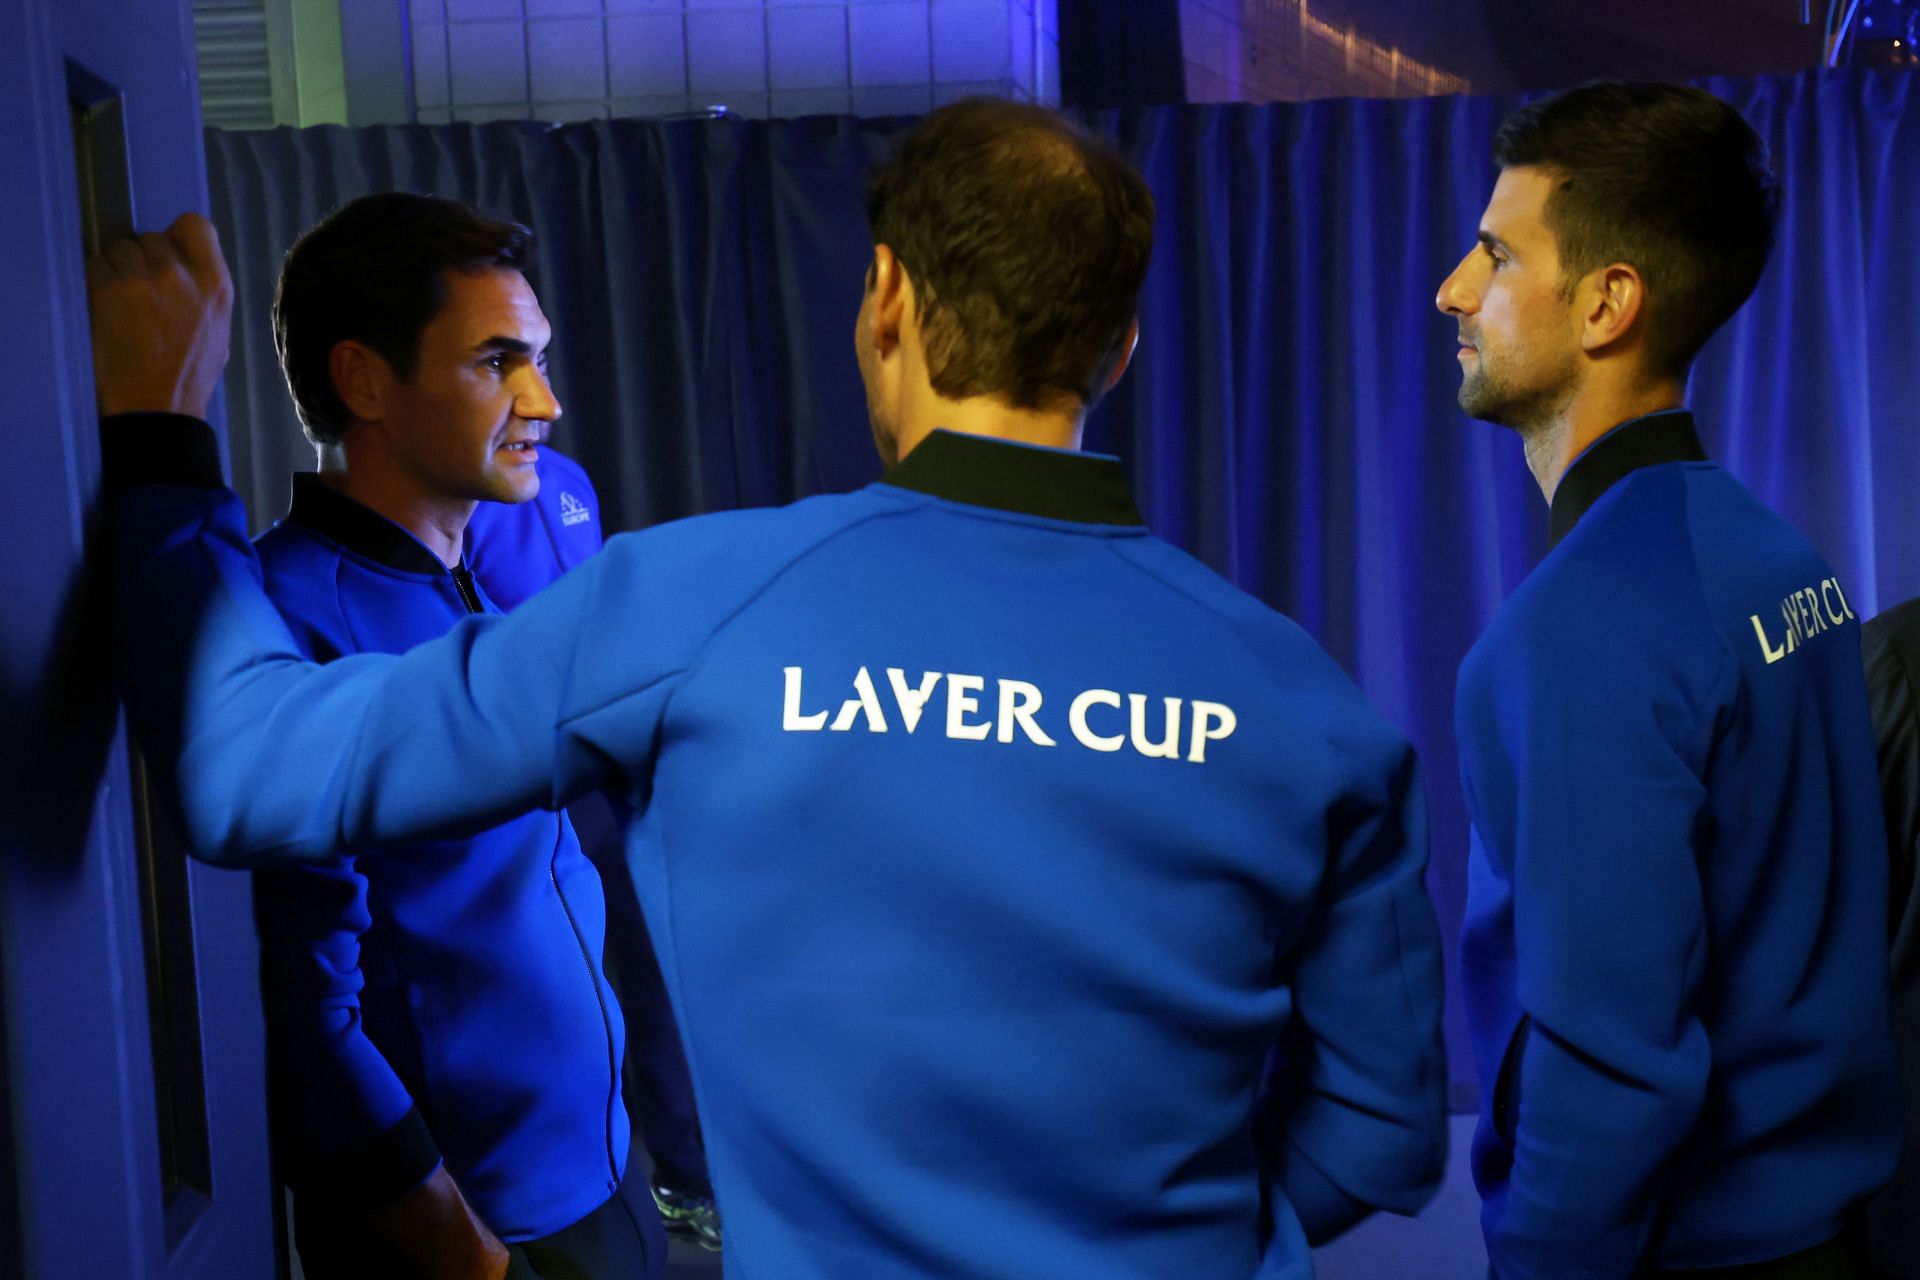 Roger Federer of Team Europe speaks with Rafael Nadal and Novak Djokovic at the Laver Cup 2022